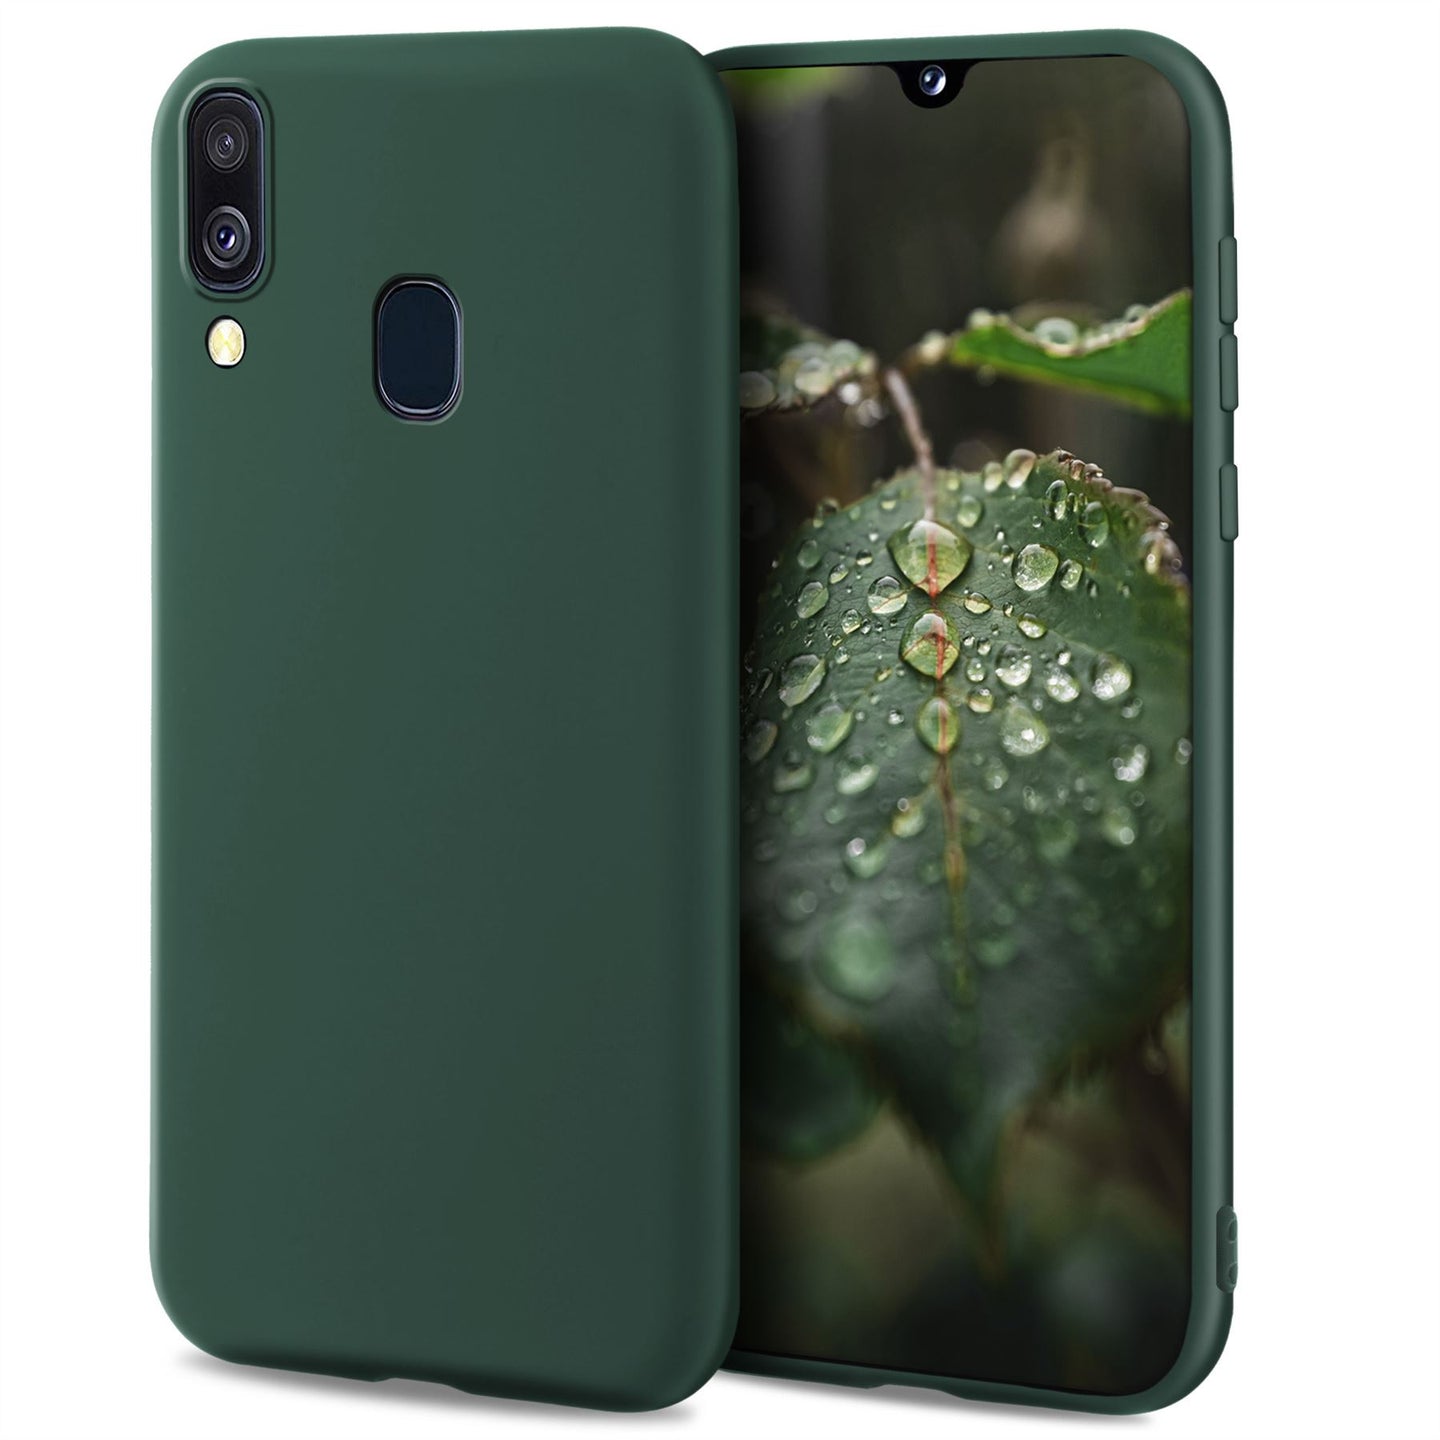 Moozy Lifestyle. Designed for Samsung A40 Case, Dark Green - Liquid Silicone Cover with Matte Finish and Soft Microfiber Lining